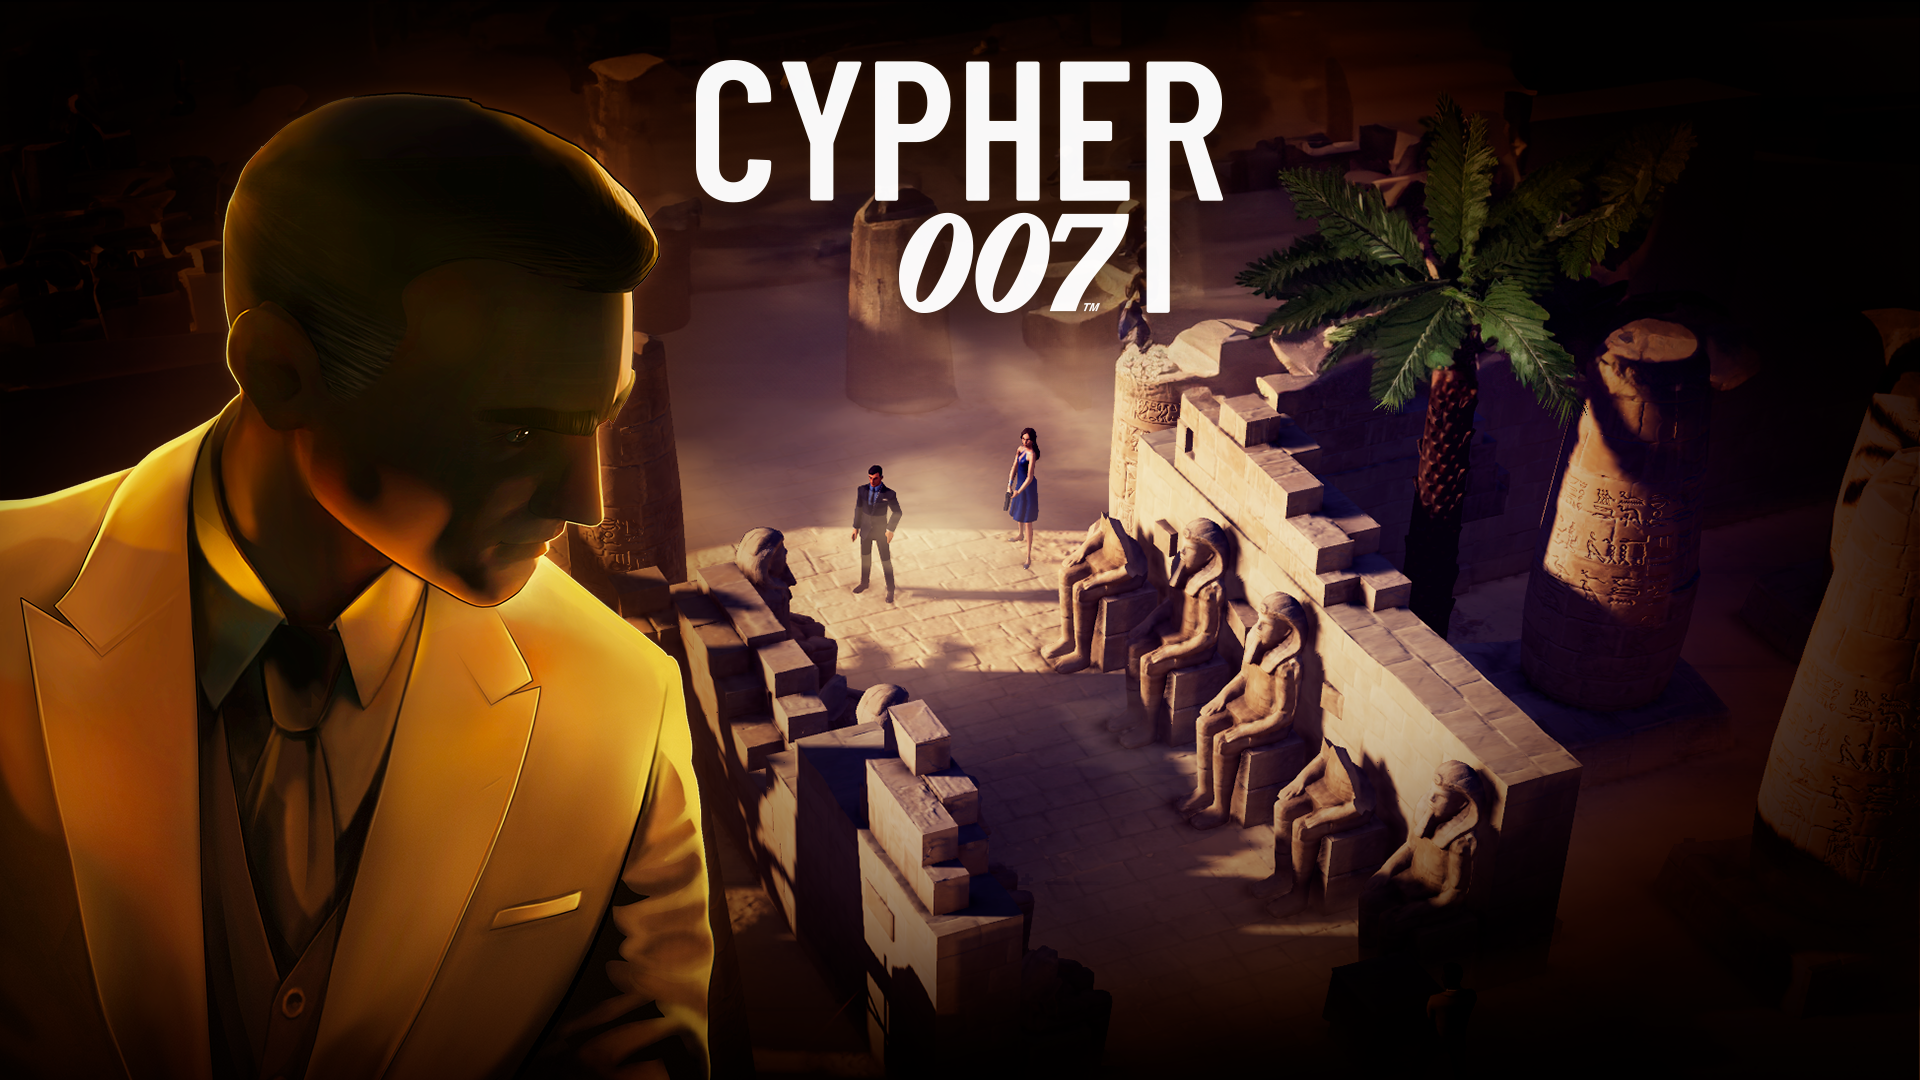 cypher-007-wallpaper.png